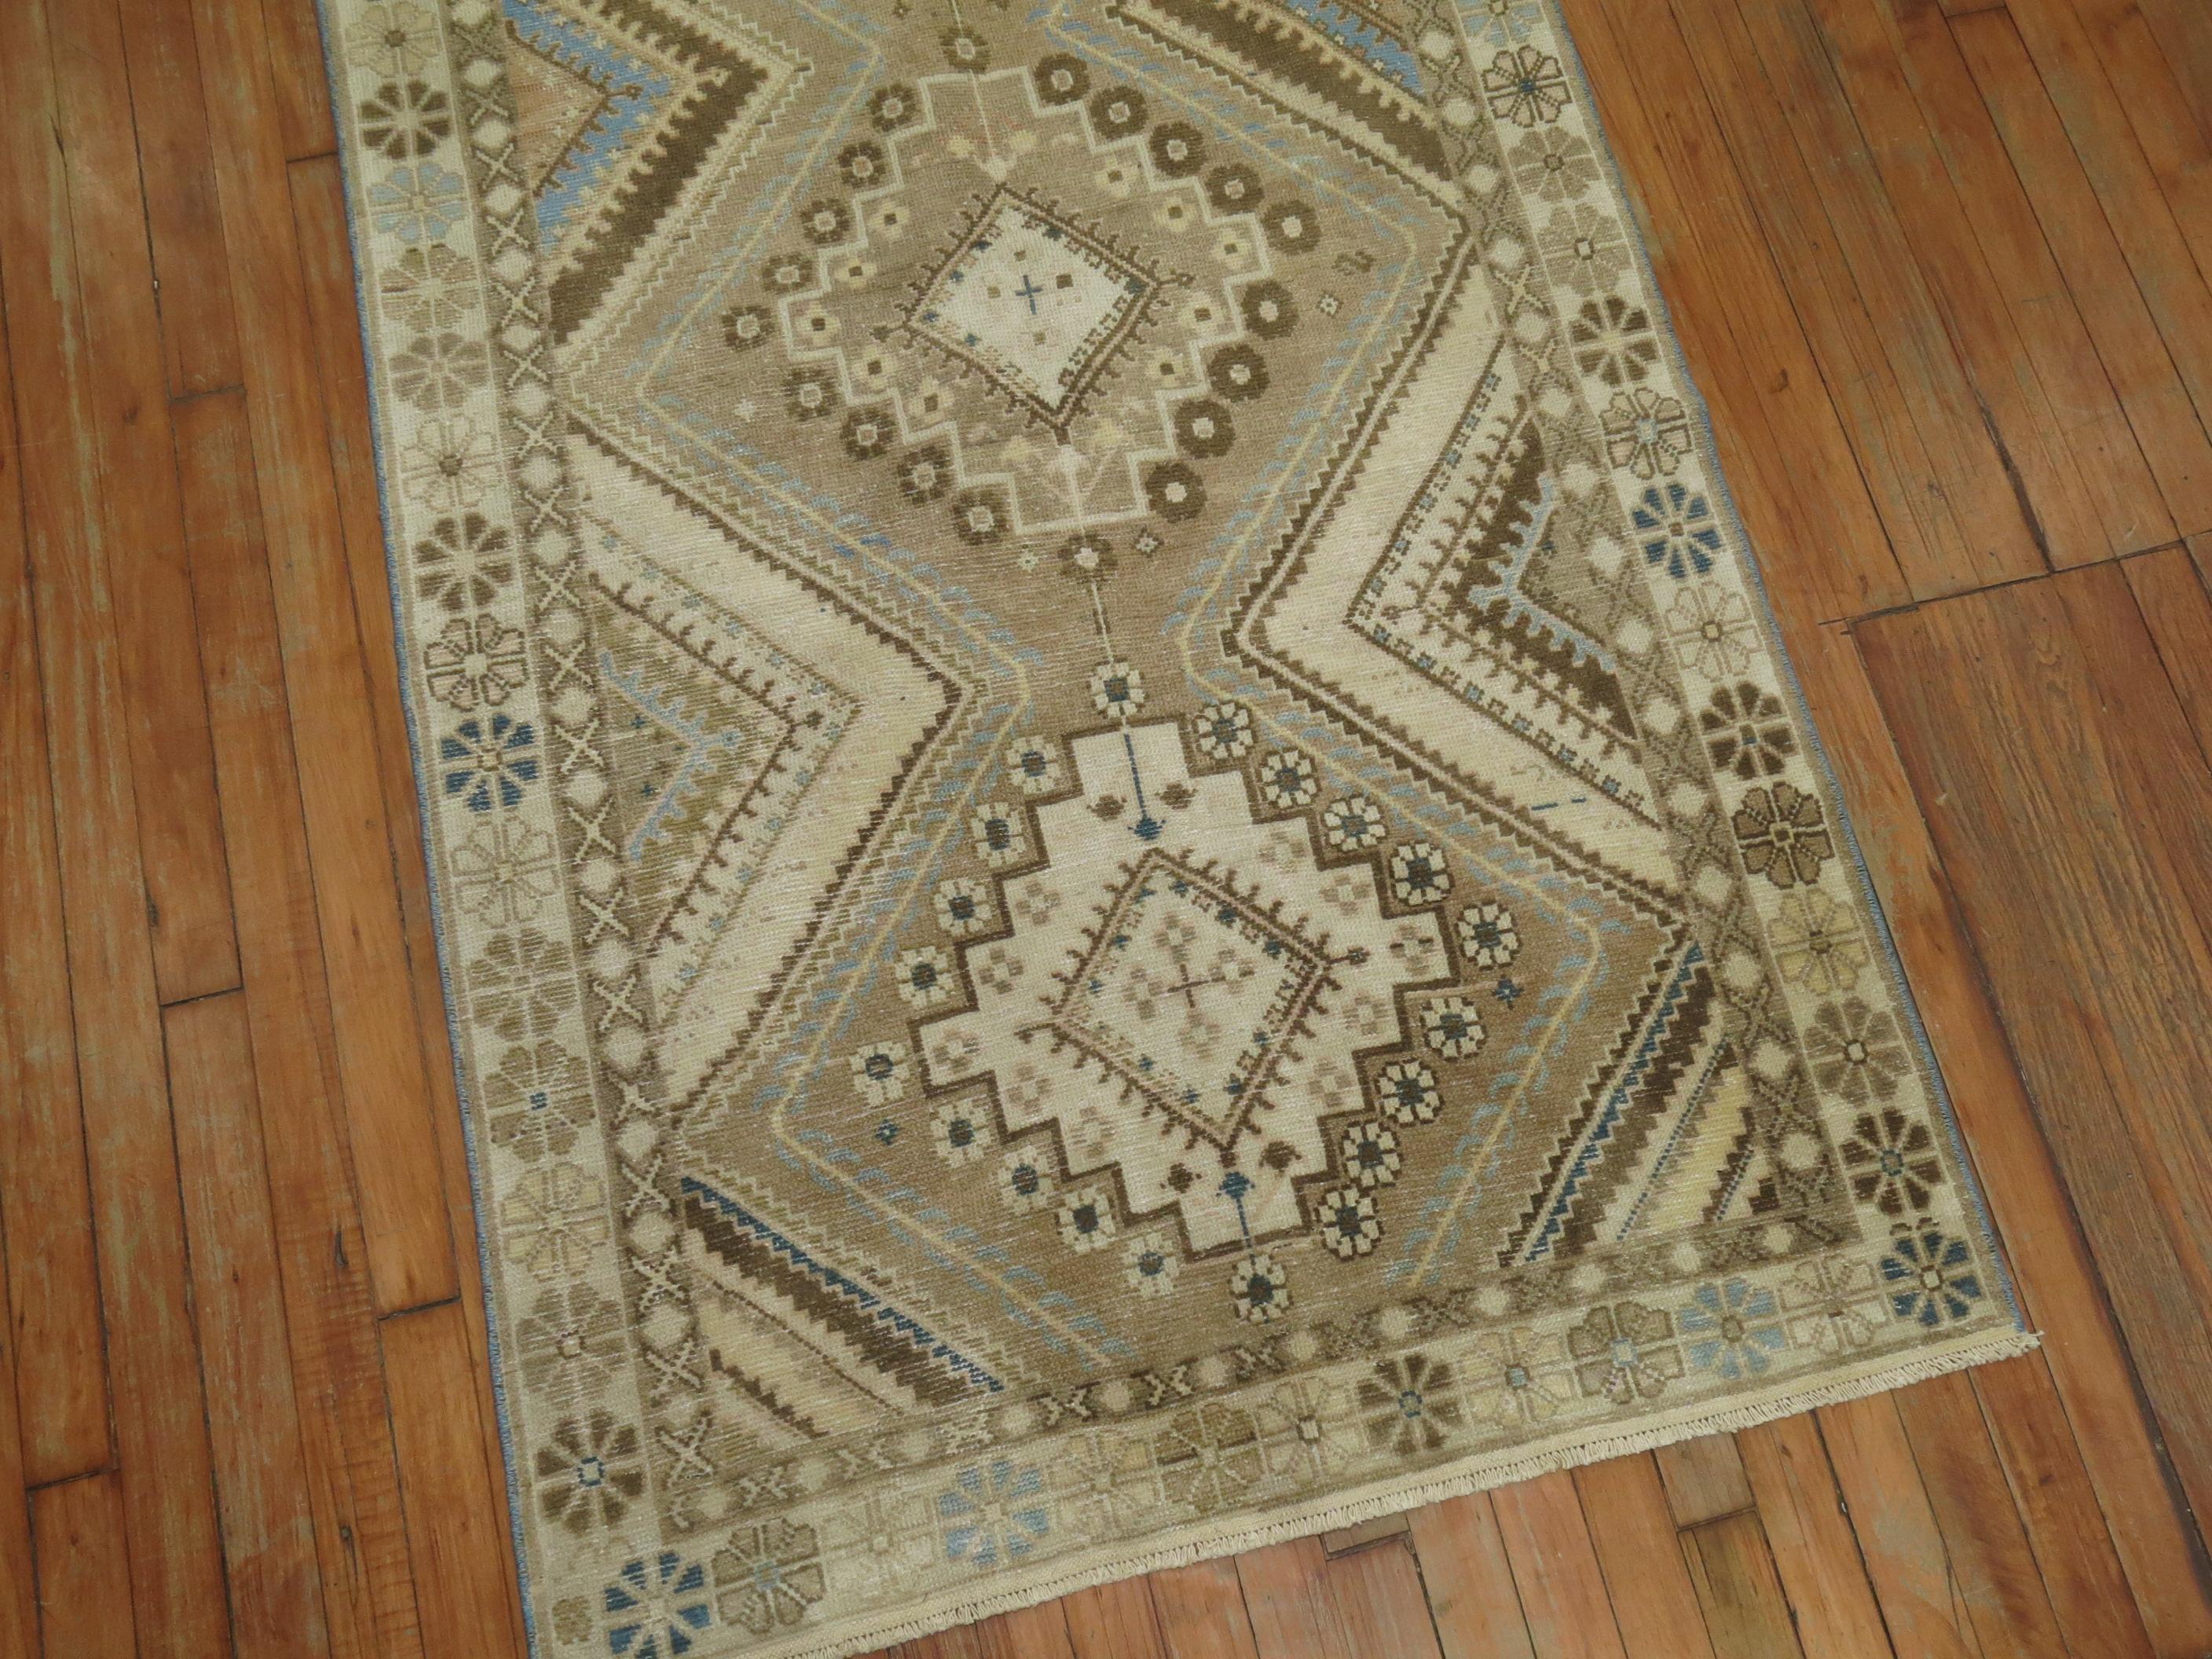 Tribal Persian runner in soft blues, clear white, browns and khaki color tones.

3'5'' x 10'2''